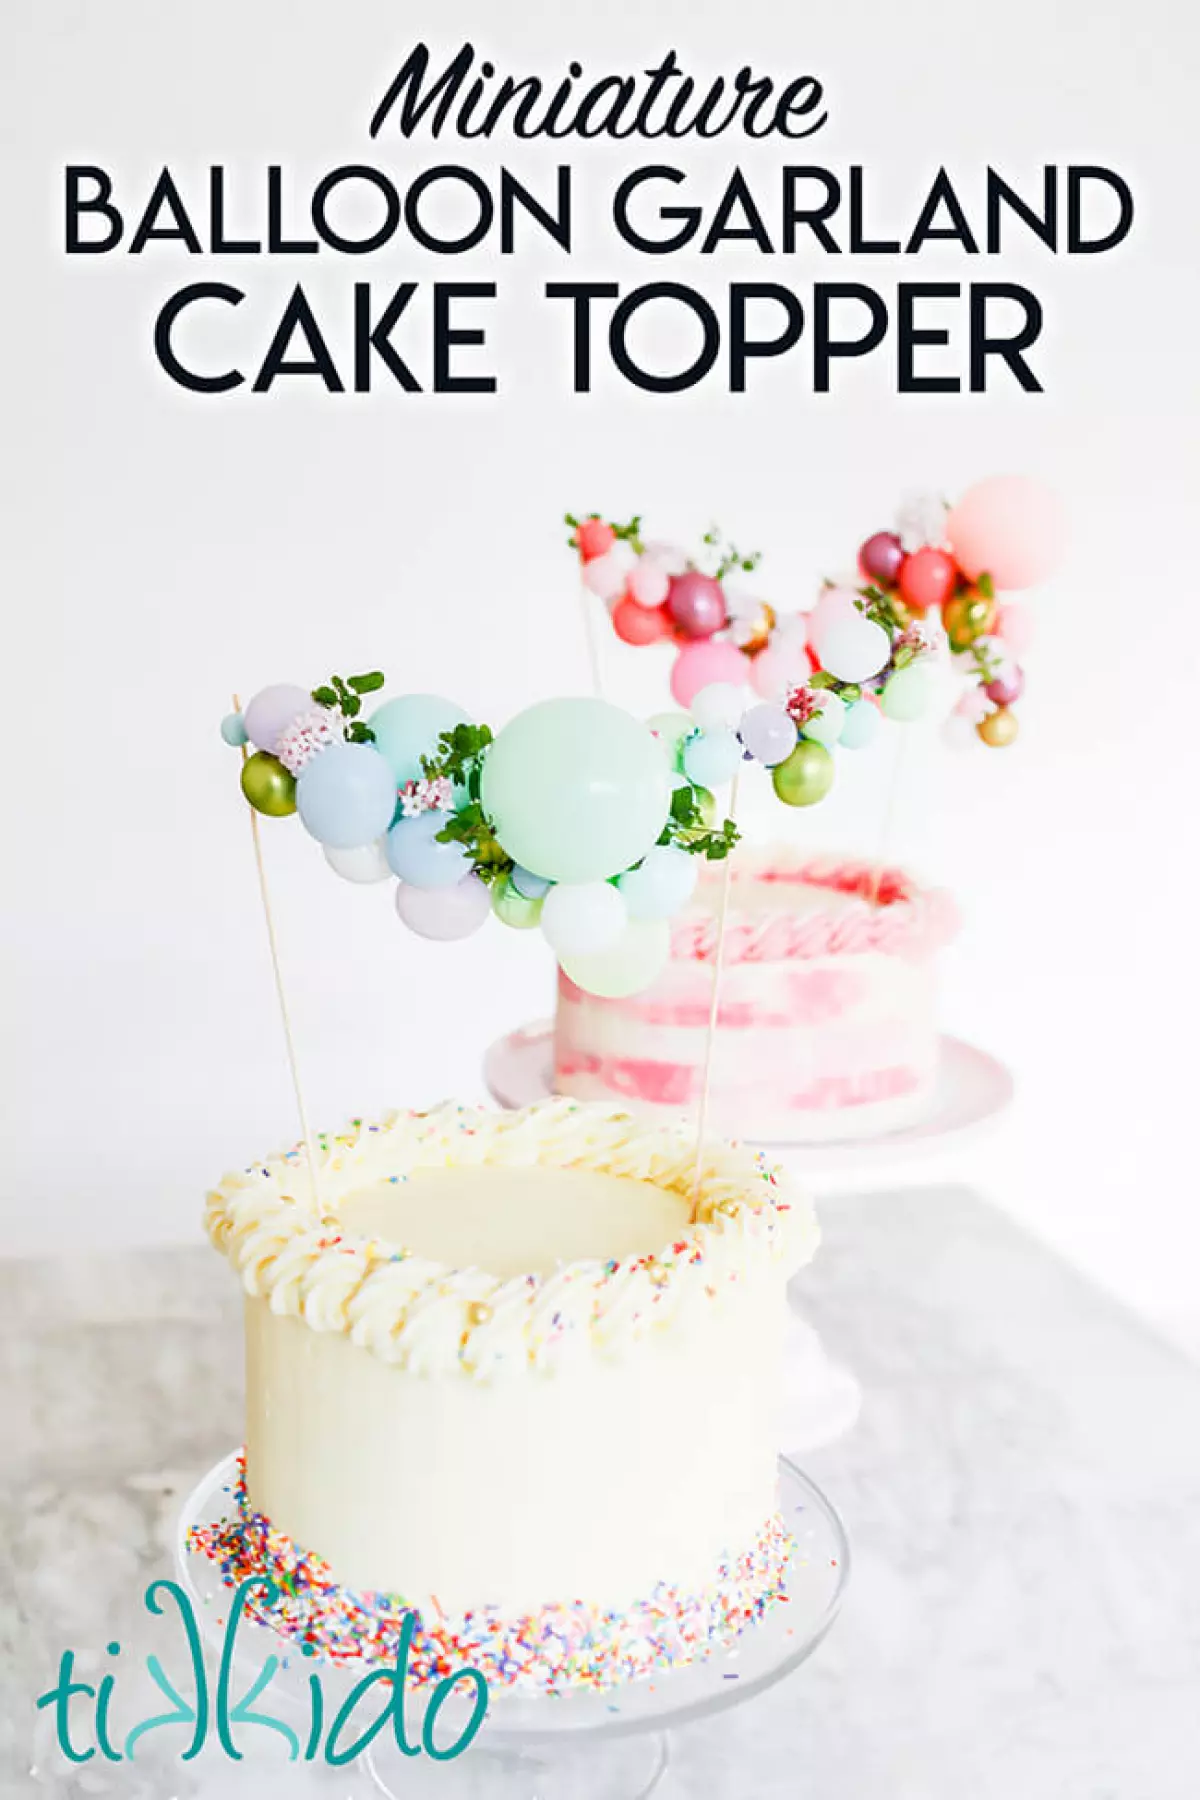 Two cakes topped with balloon garland cake toppers, with text overlay reading "Miniature Balloon Garland Cake Topper."